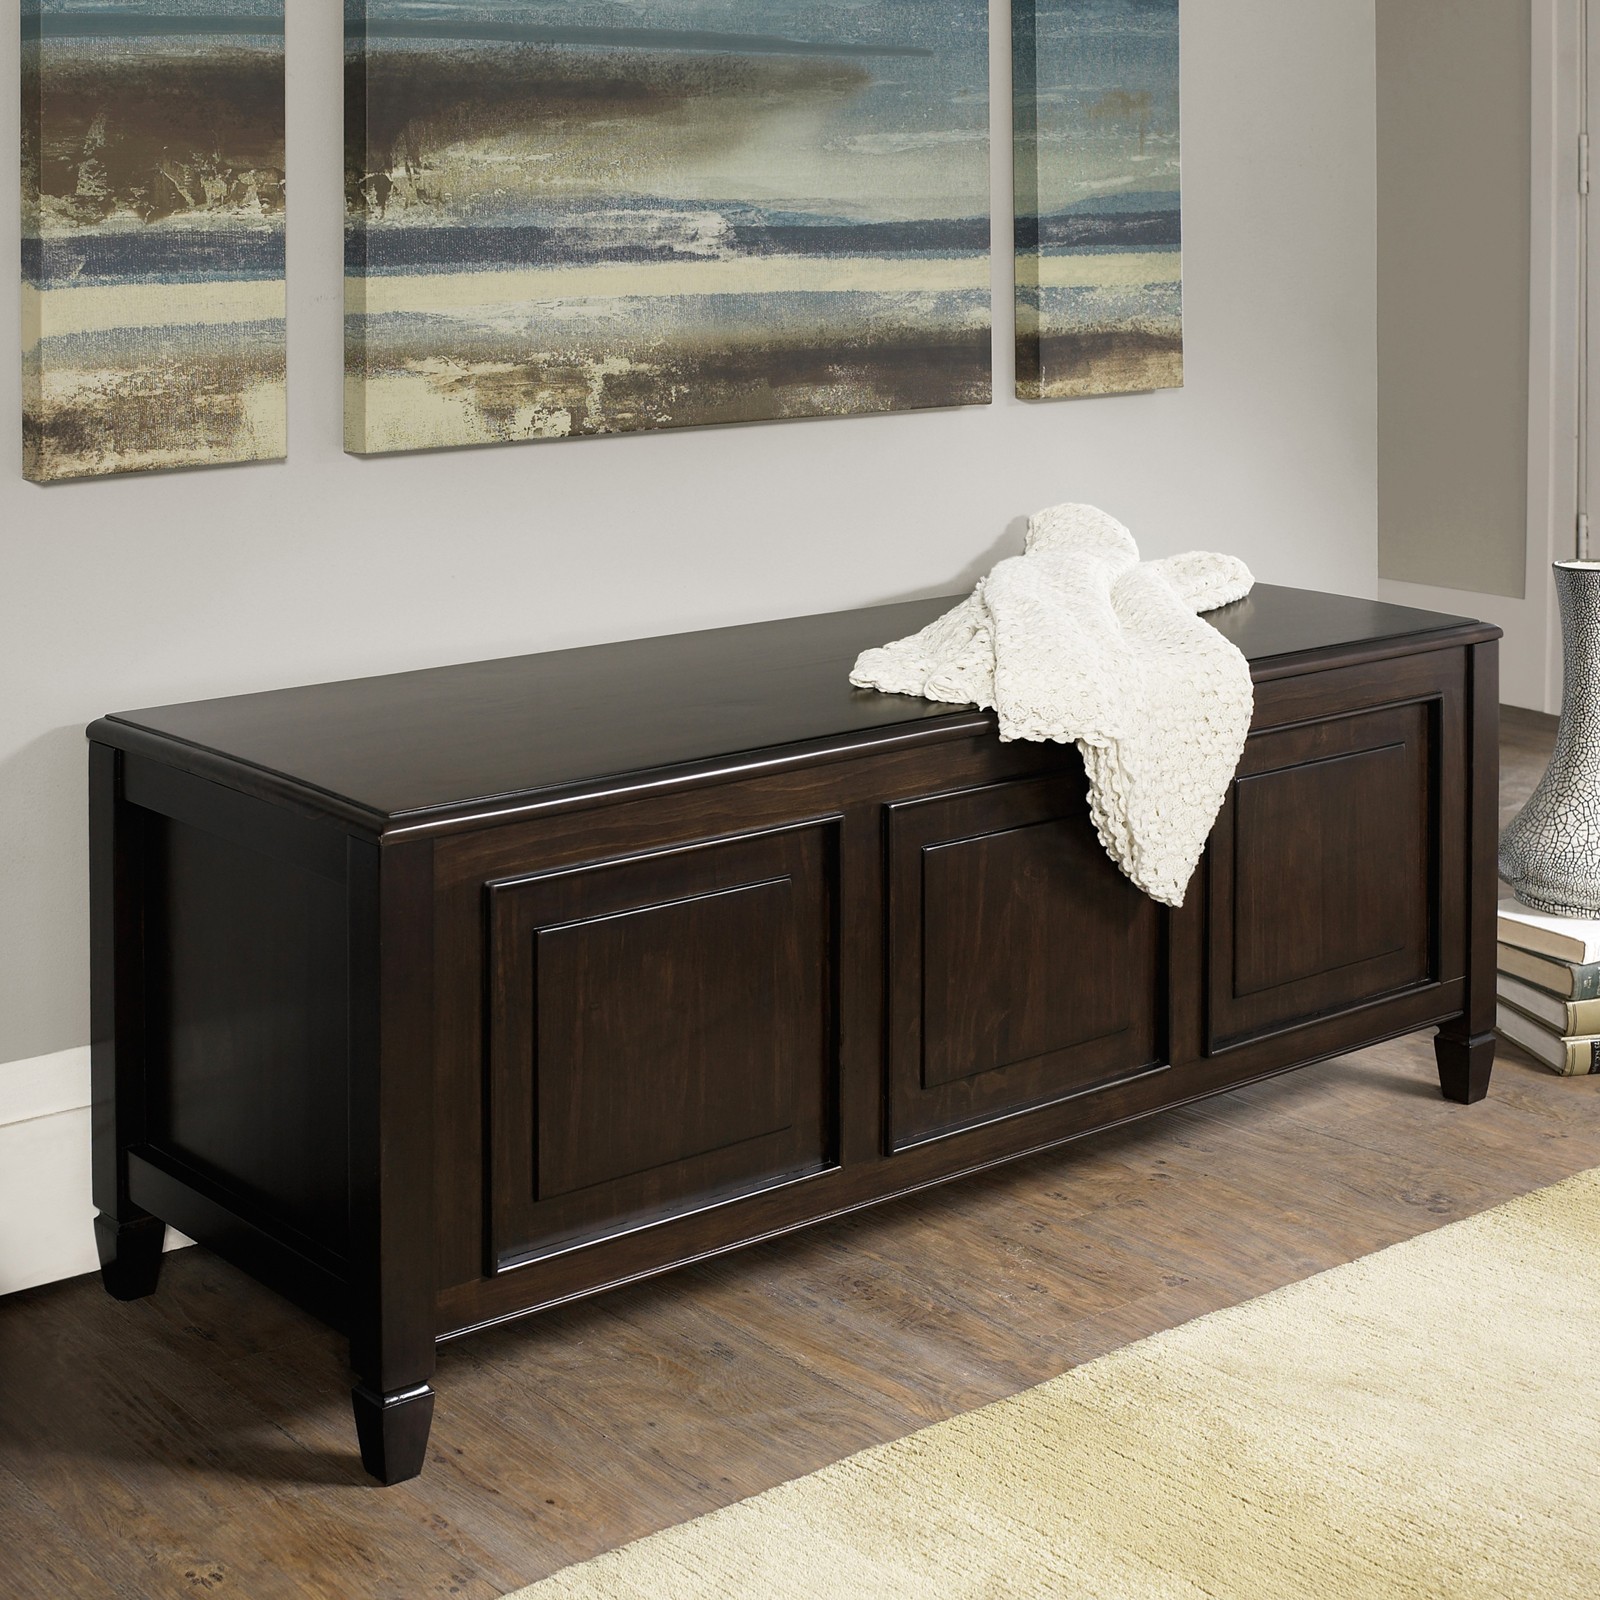 Simpli home connaught storage bench trunk indoor benches